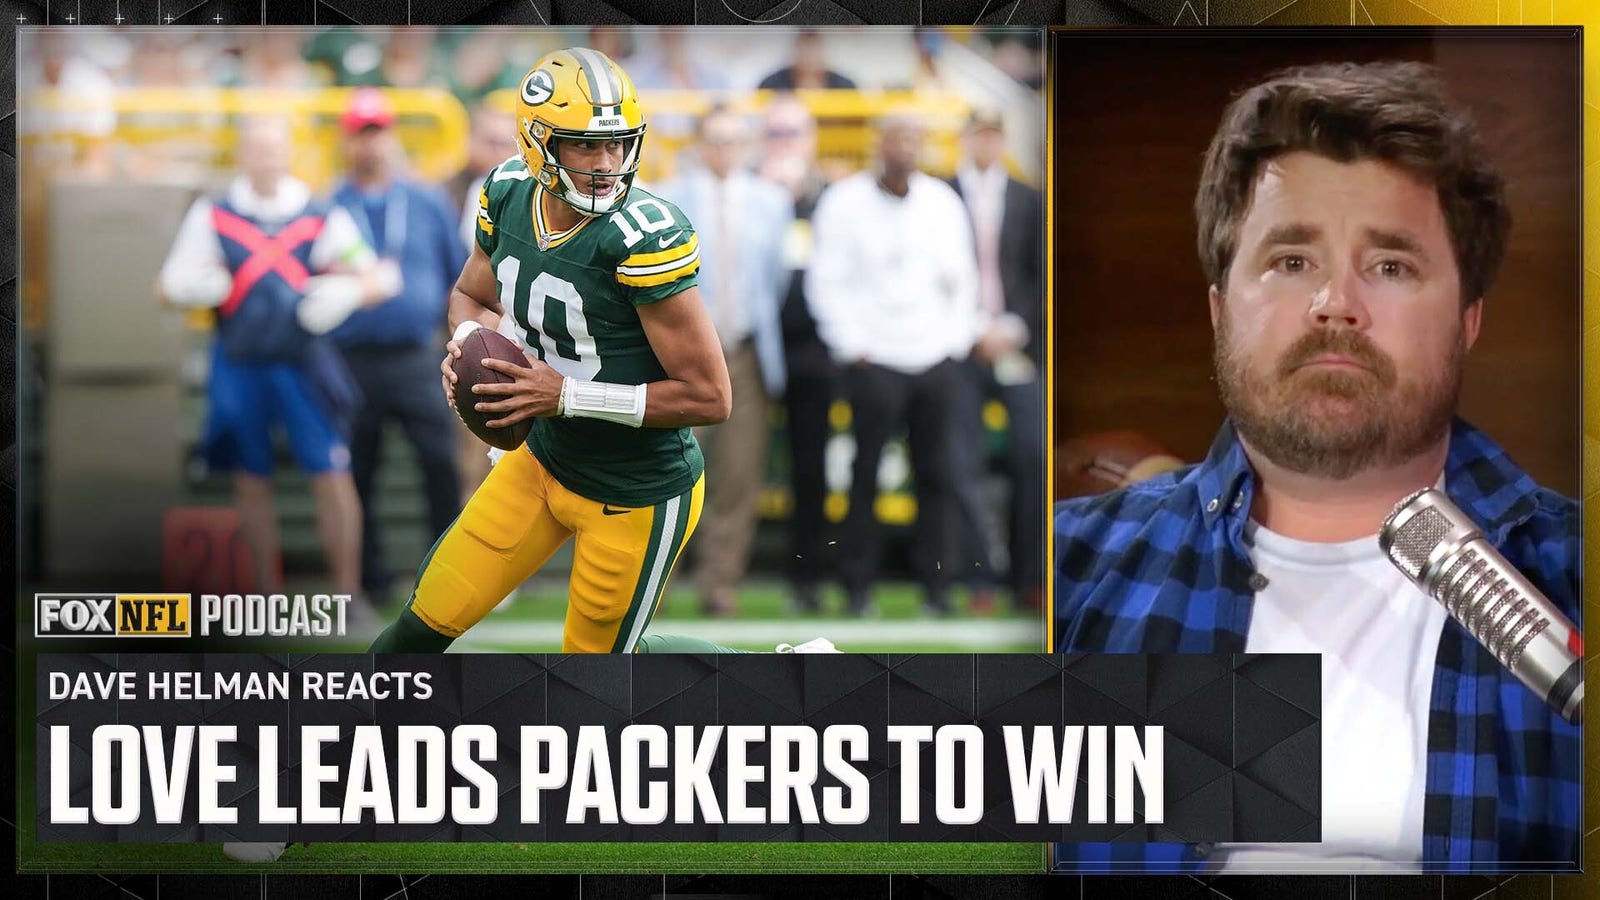 Dave Helman reacts to Packers' comeback win over Saints